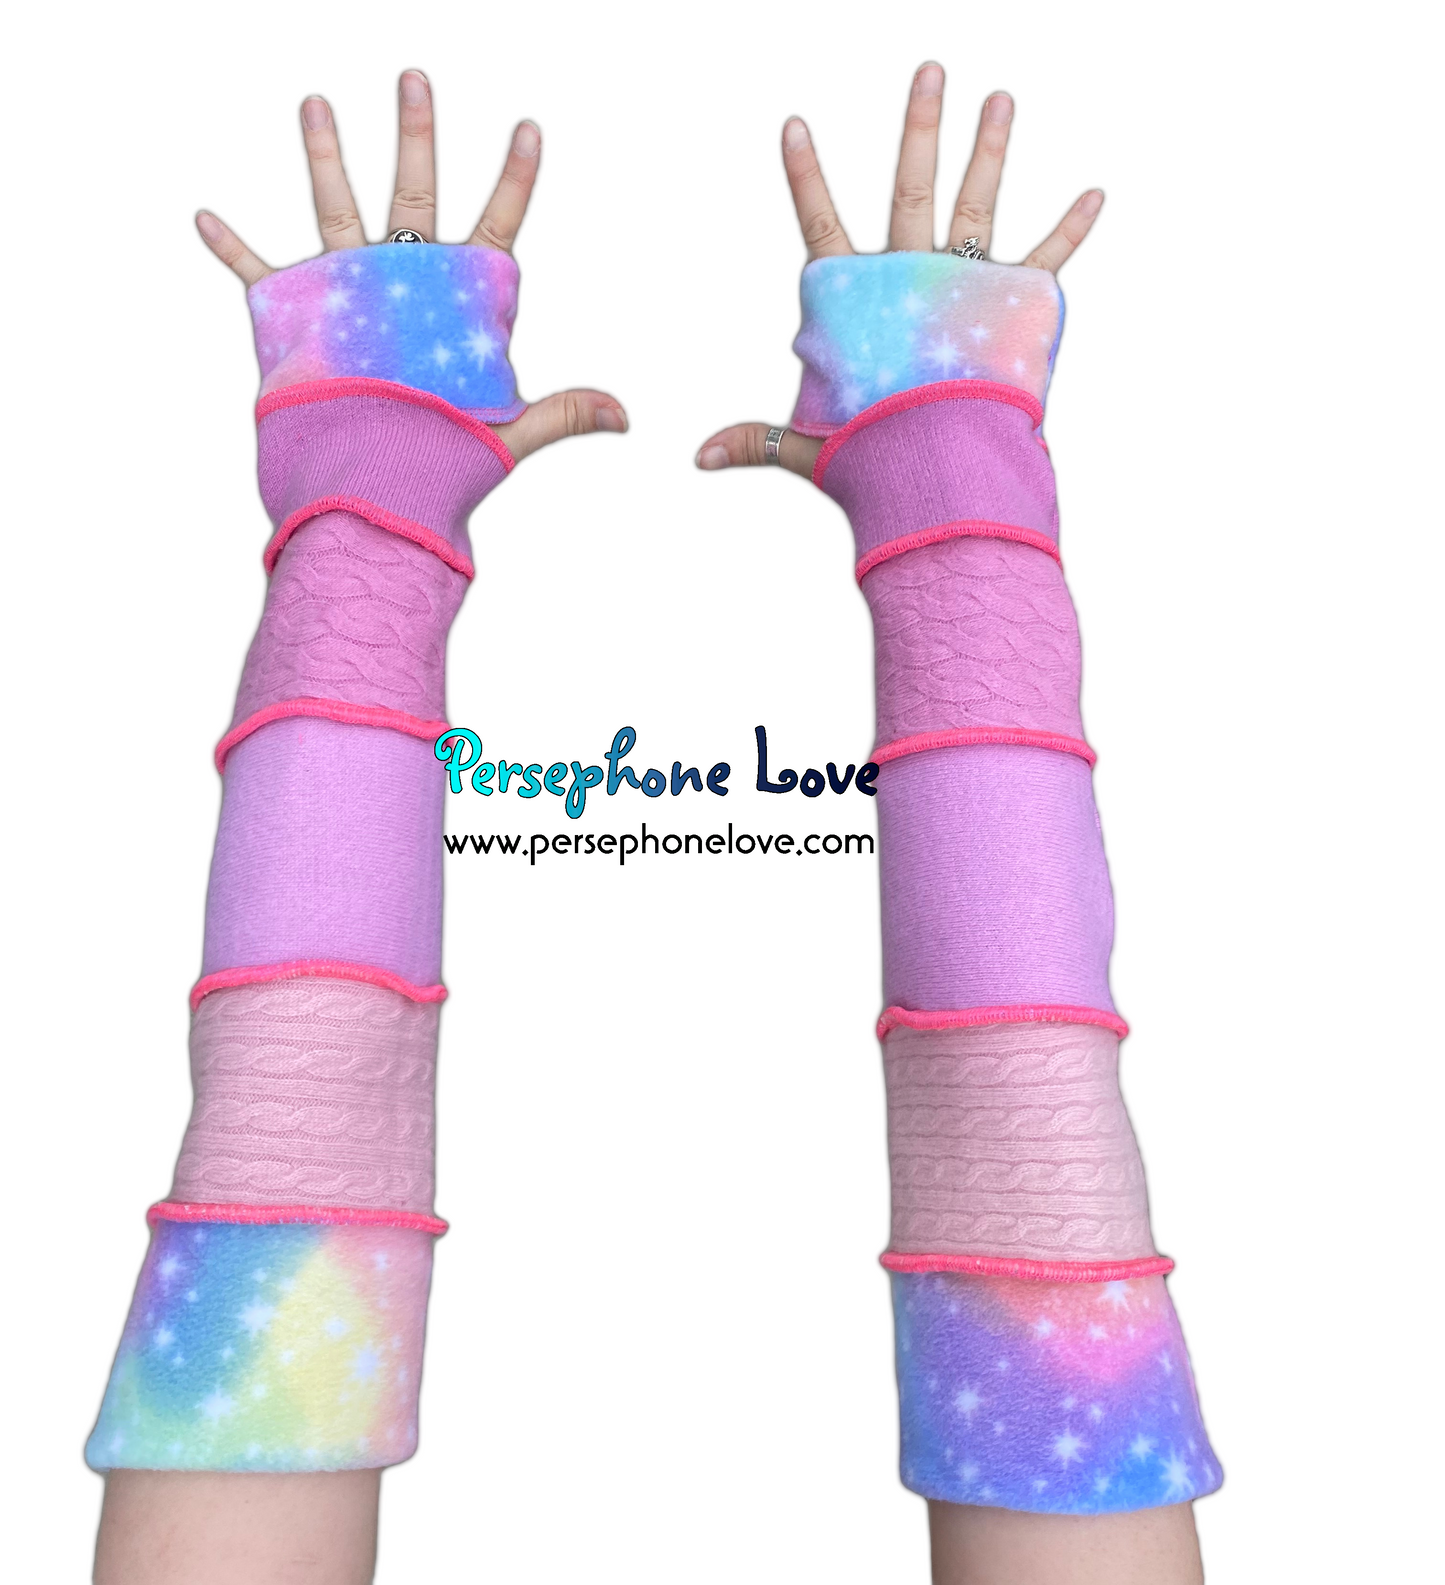 Katwise-inspired felted 100% cashmere arm warmers-1586